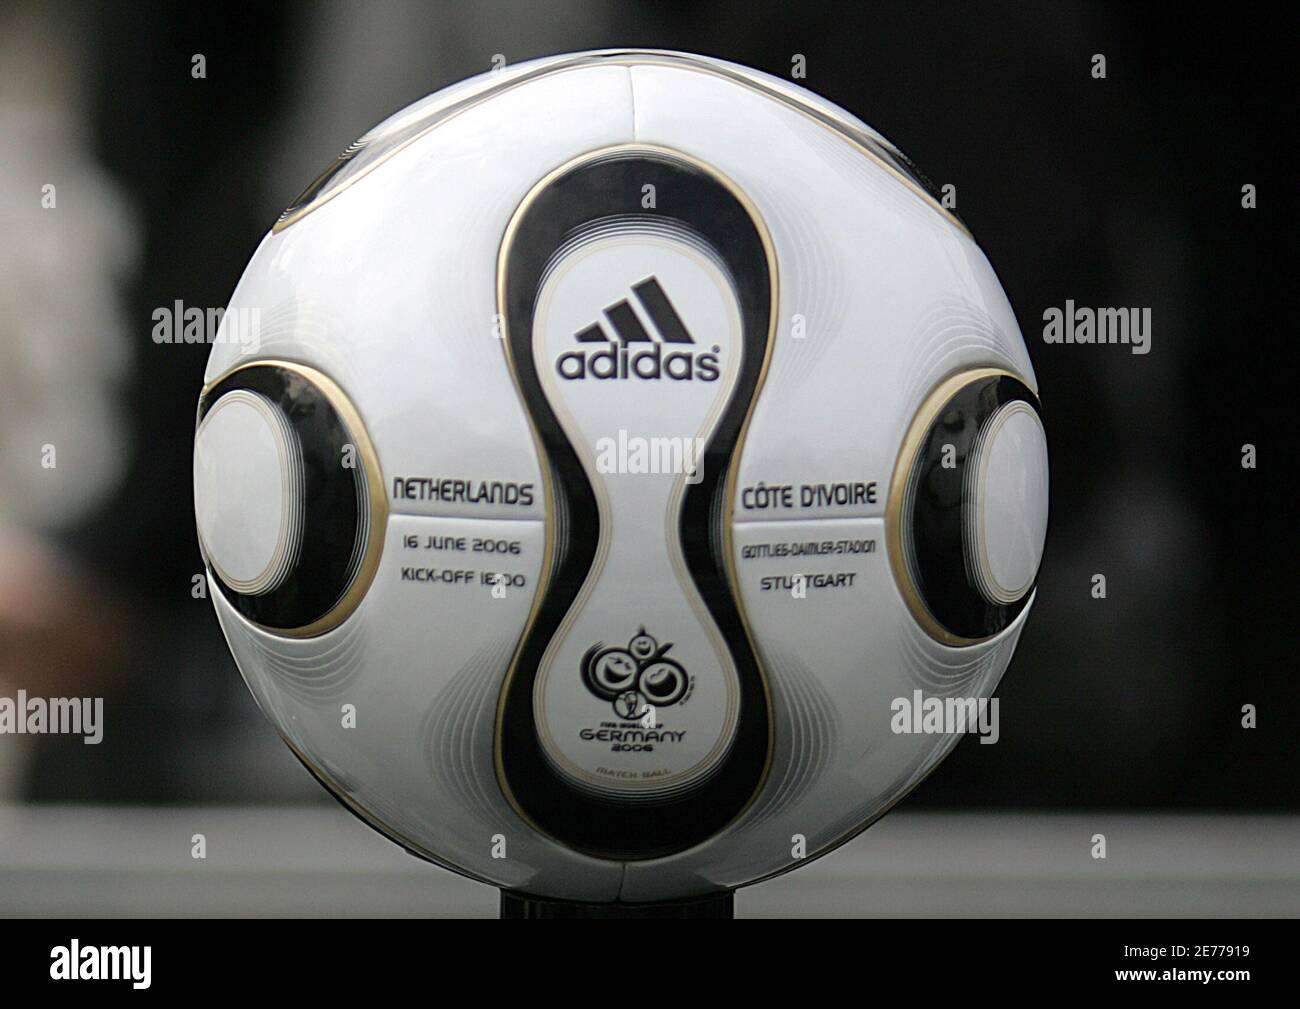 The soccer ball for the FIFA 2006 Soccer World Cup match between  Netherlands and Ivory Coast in Stutgart is presented to the media in Berlin  April 18, 2006. Franz Beckenbauer (L), President